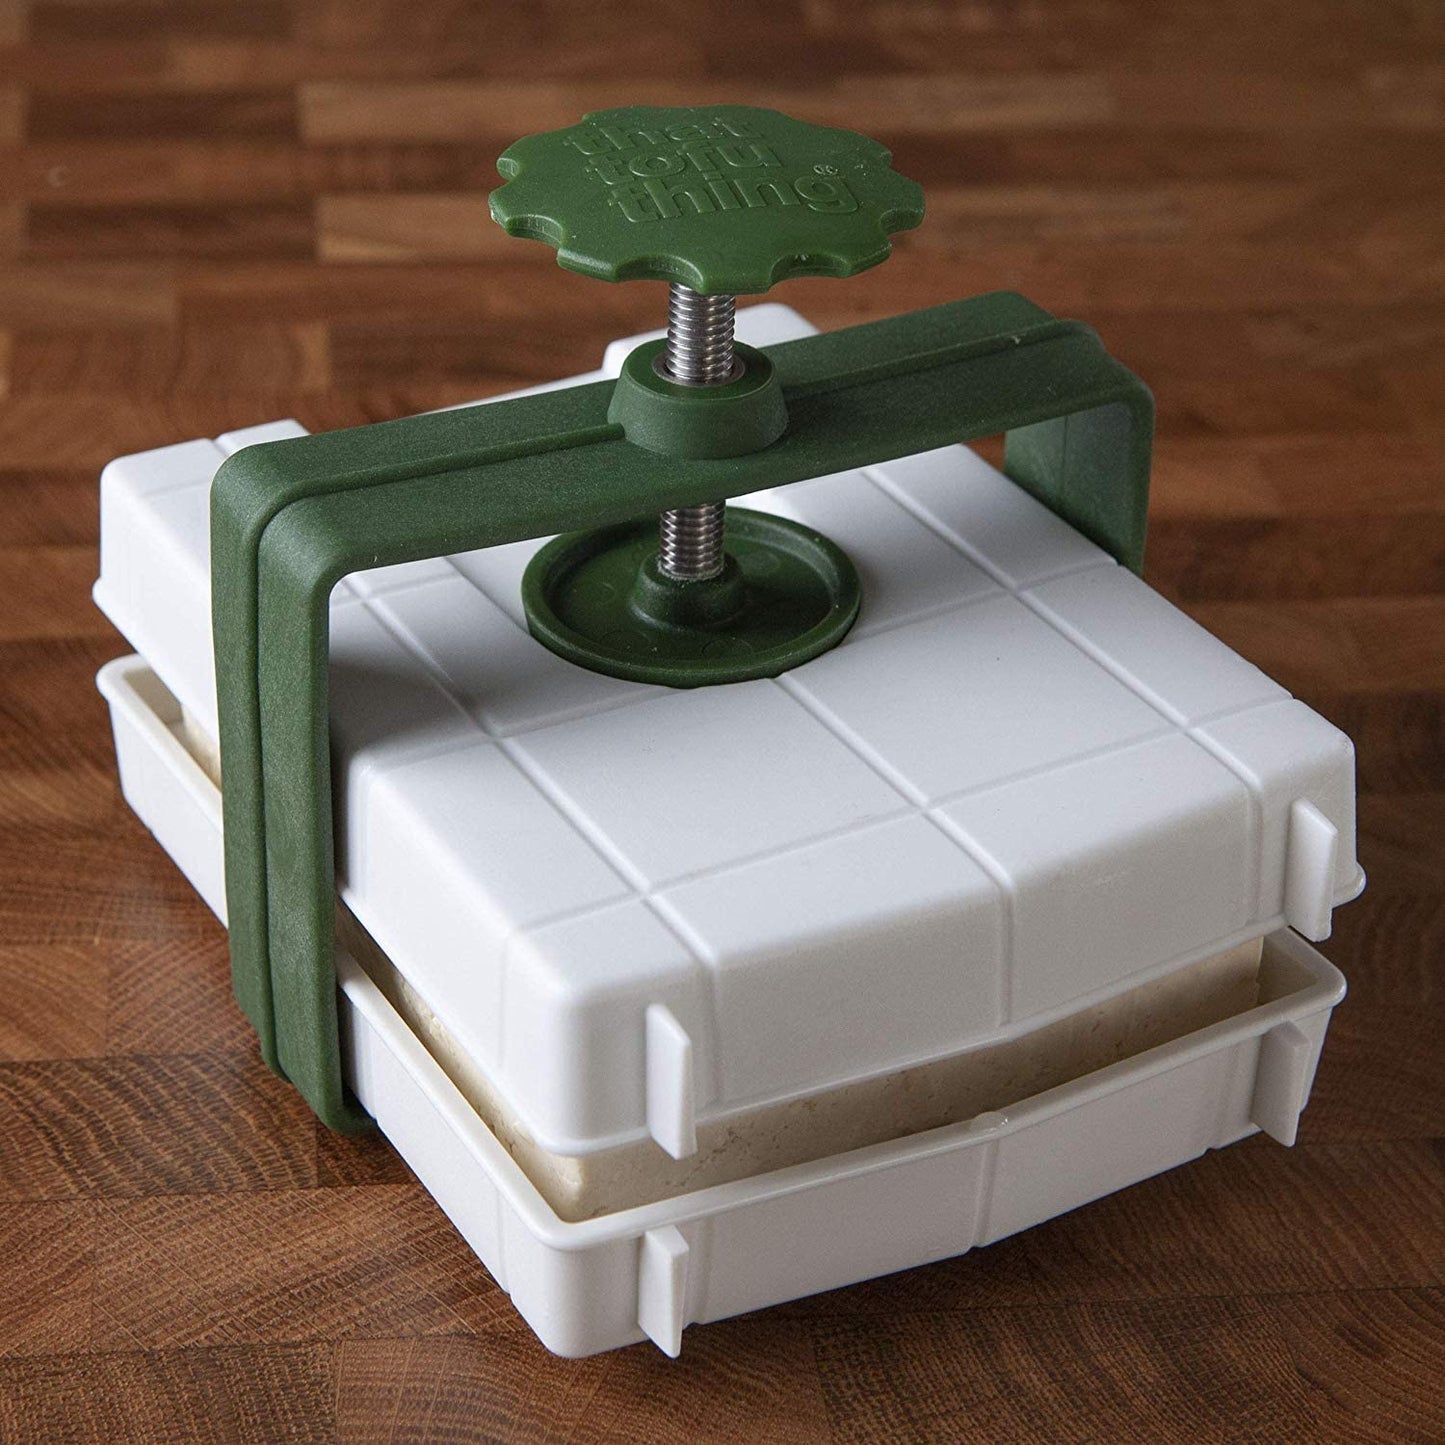 - Tofu Press - Get More Out of Your Tofu with the Most Efficient Tofu Press